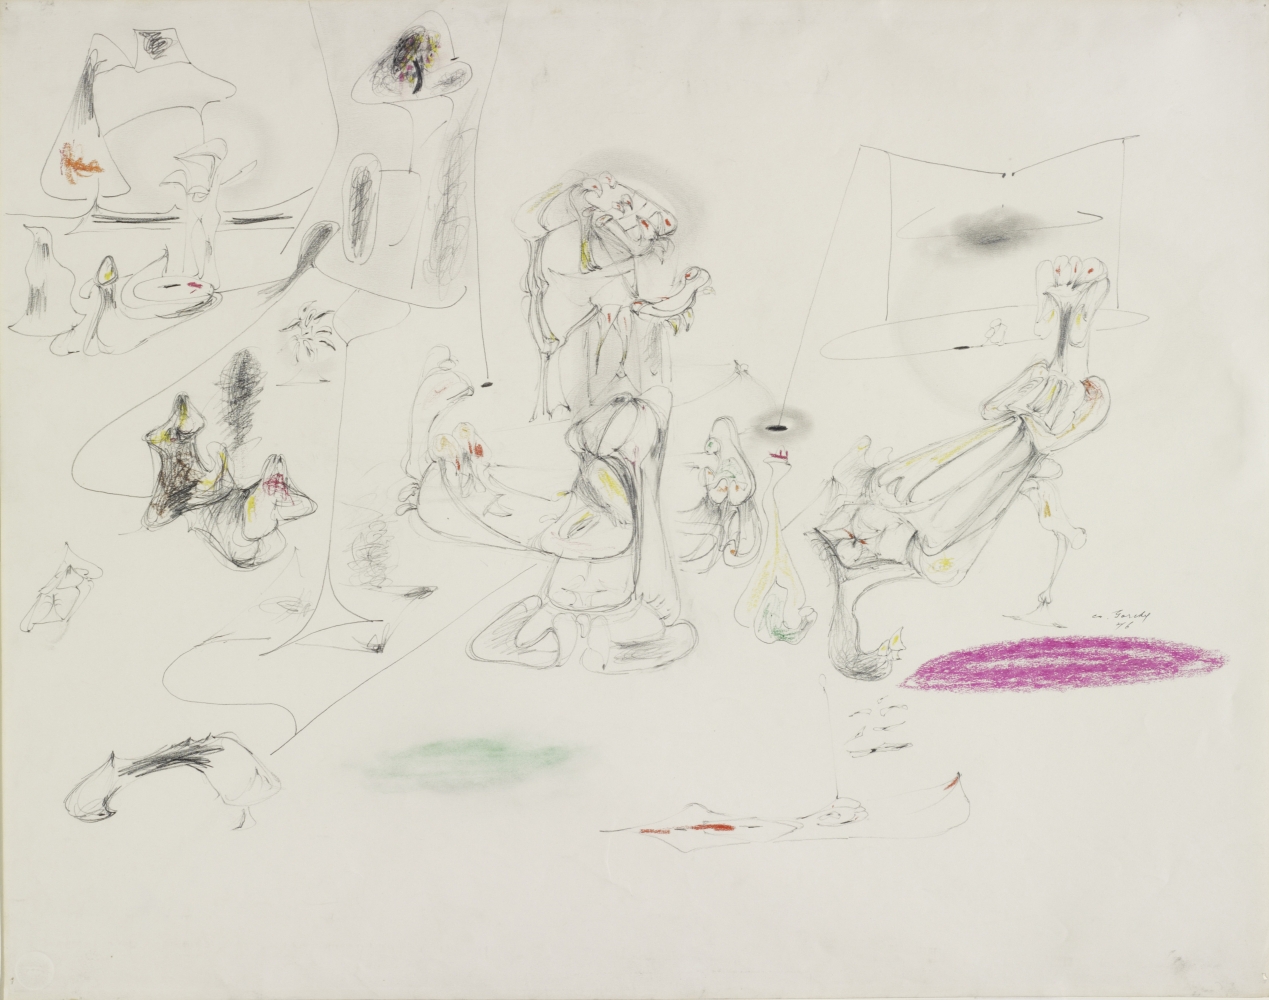 Drawing,&nbsp;Pastoral, 1946, graphite pencil and crayon on paper, 23 x 29 in. (58.4 x 73.7 cm). Private collection. [AGCR: D1398]